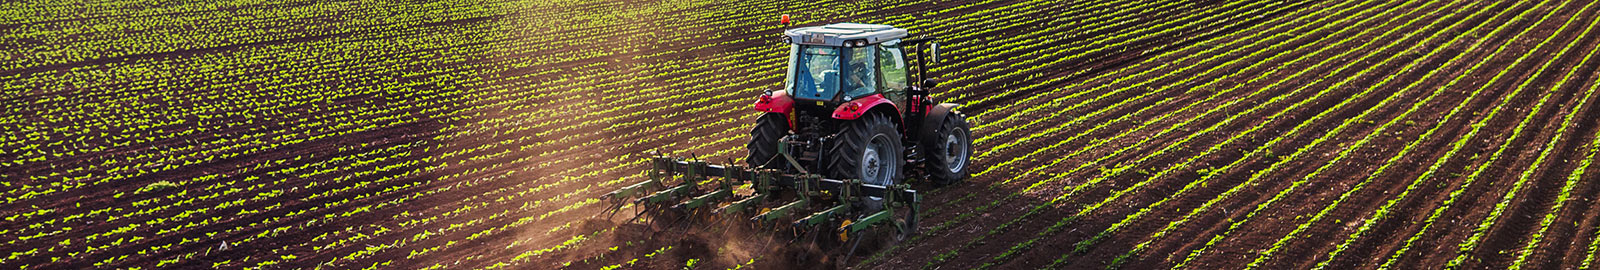 Tractor planting in field.